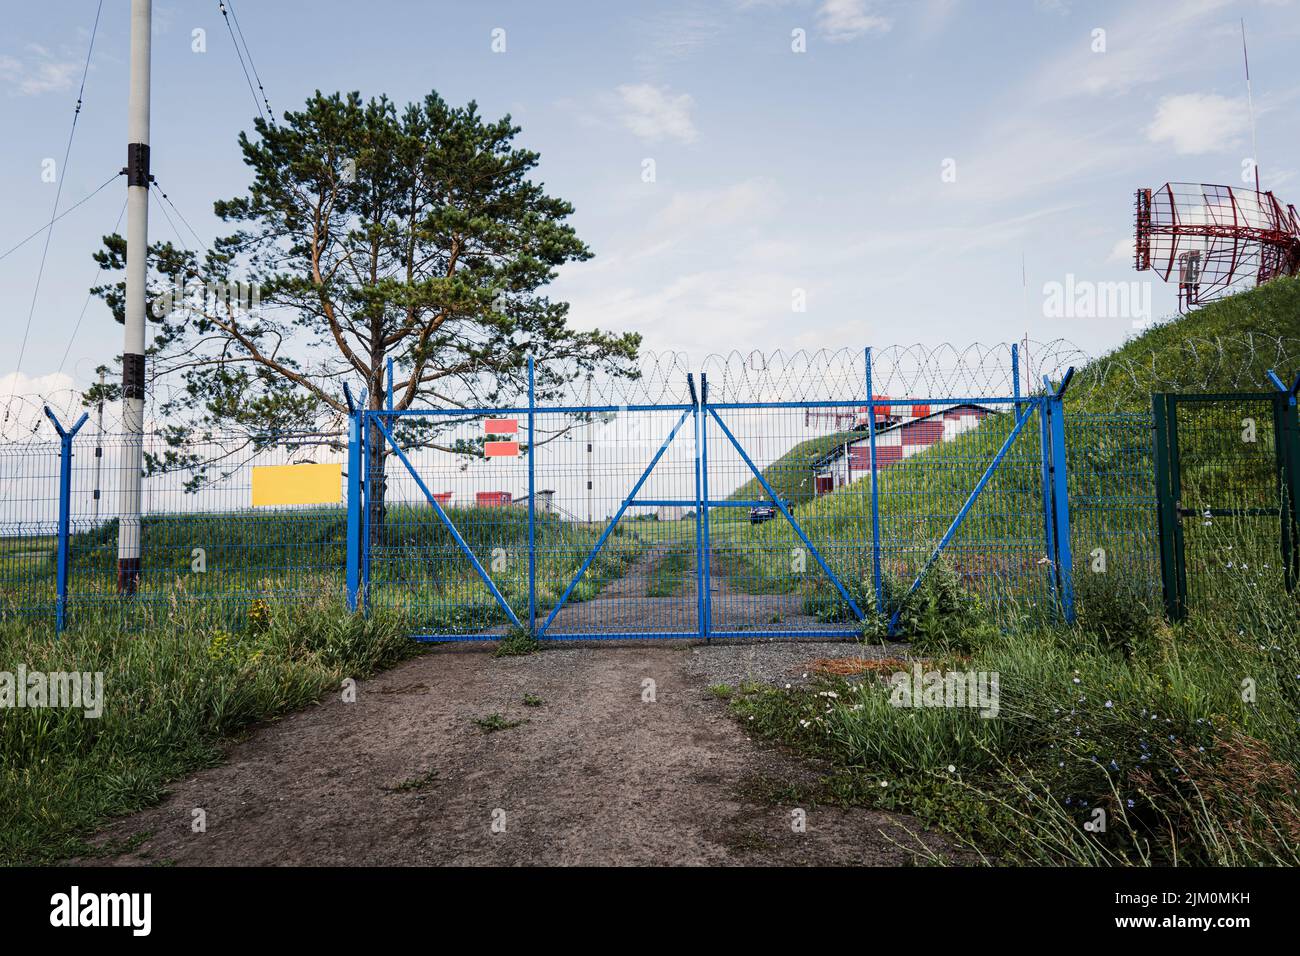 The restricted area is fenced with a metal fence, gates and barbed wire. Stock Photo